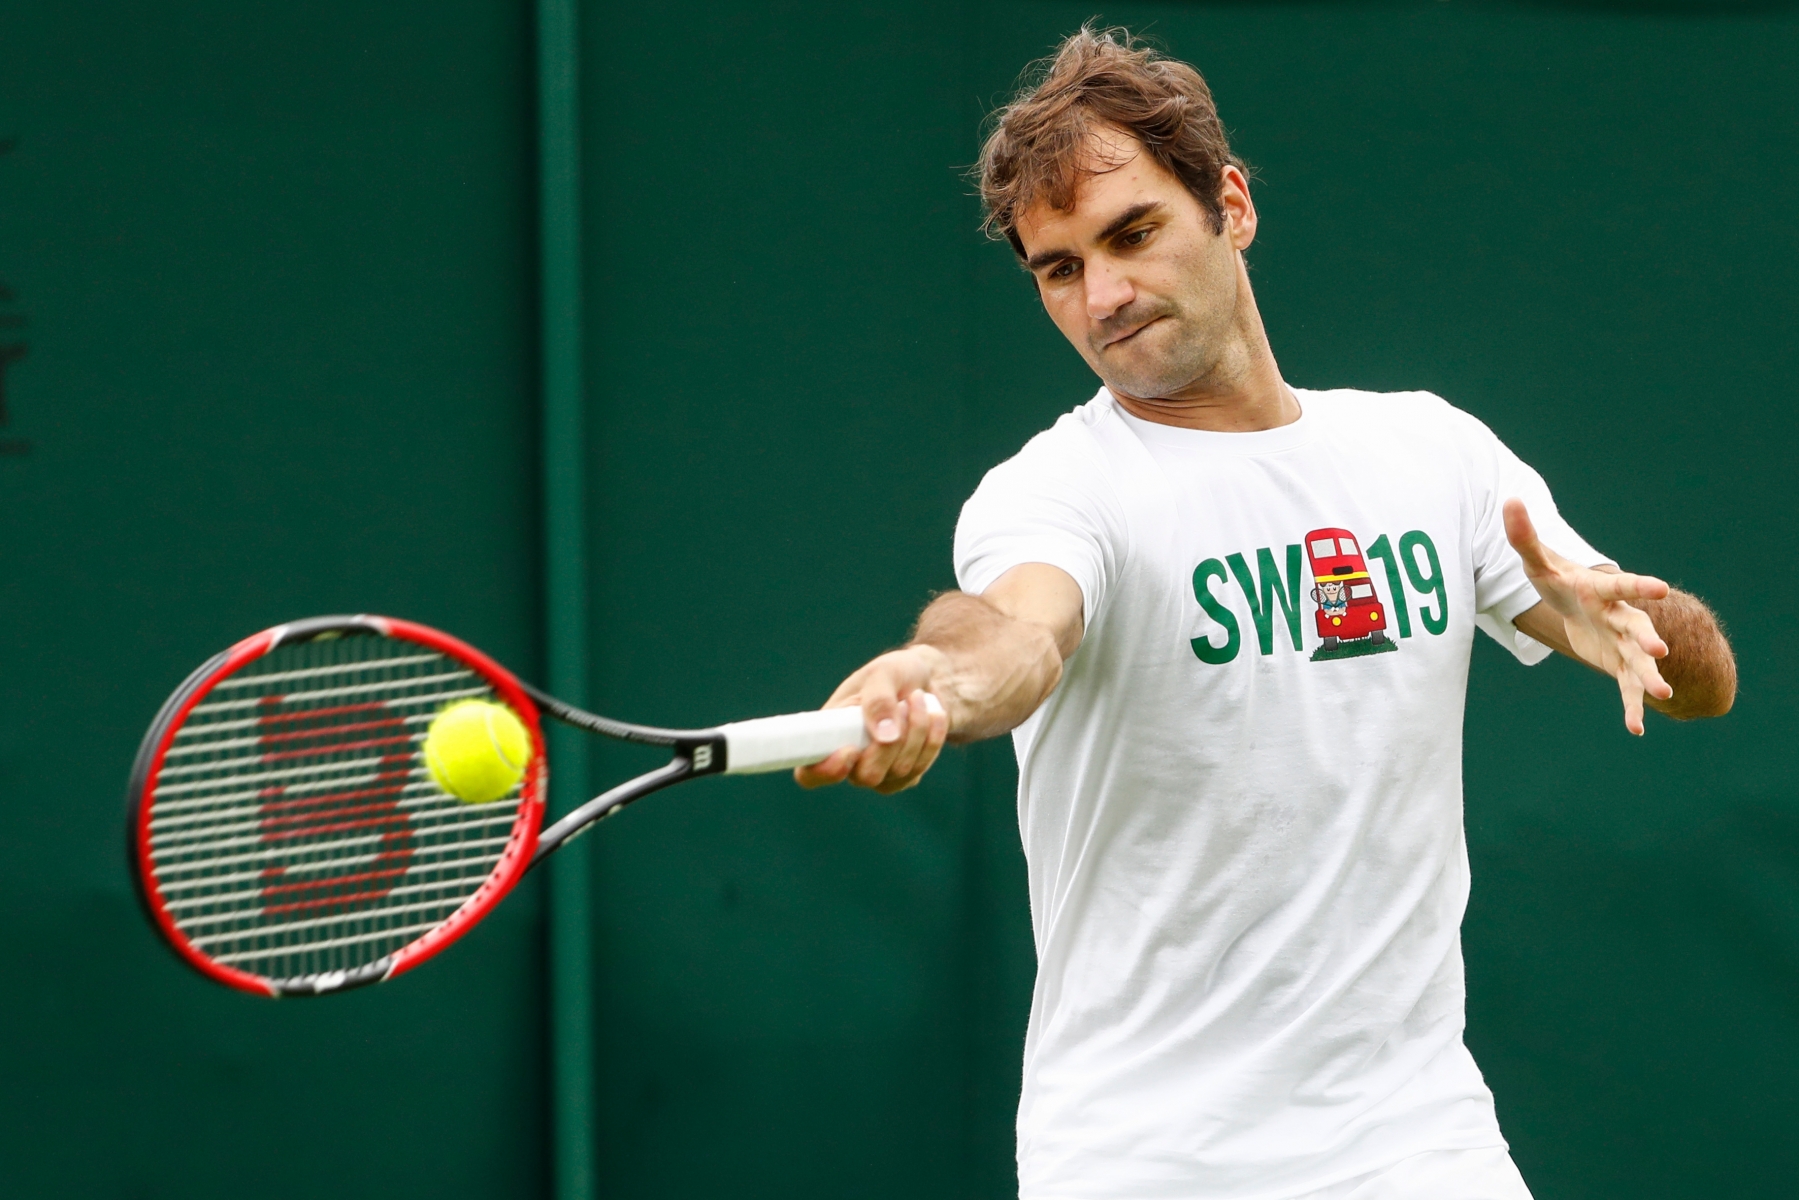 Roger Federer of Switzerland hits a ball during a training session at the All England Lawn Tennis Championships in Wimbledon, London, Thursday, June 23, 2016. The Wimbledon Tennis Championships 2016 will be held in London from 27 June to 10 July. (KEYSTONE/Peter Klaunzer) BRITAIN TENNIS WIMBLEDON 2016